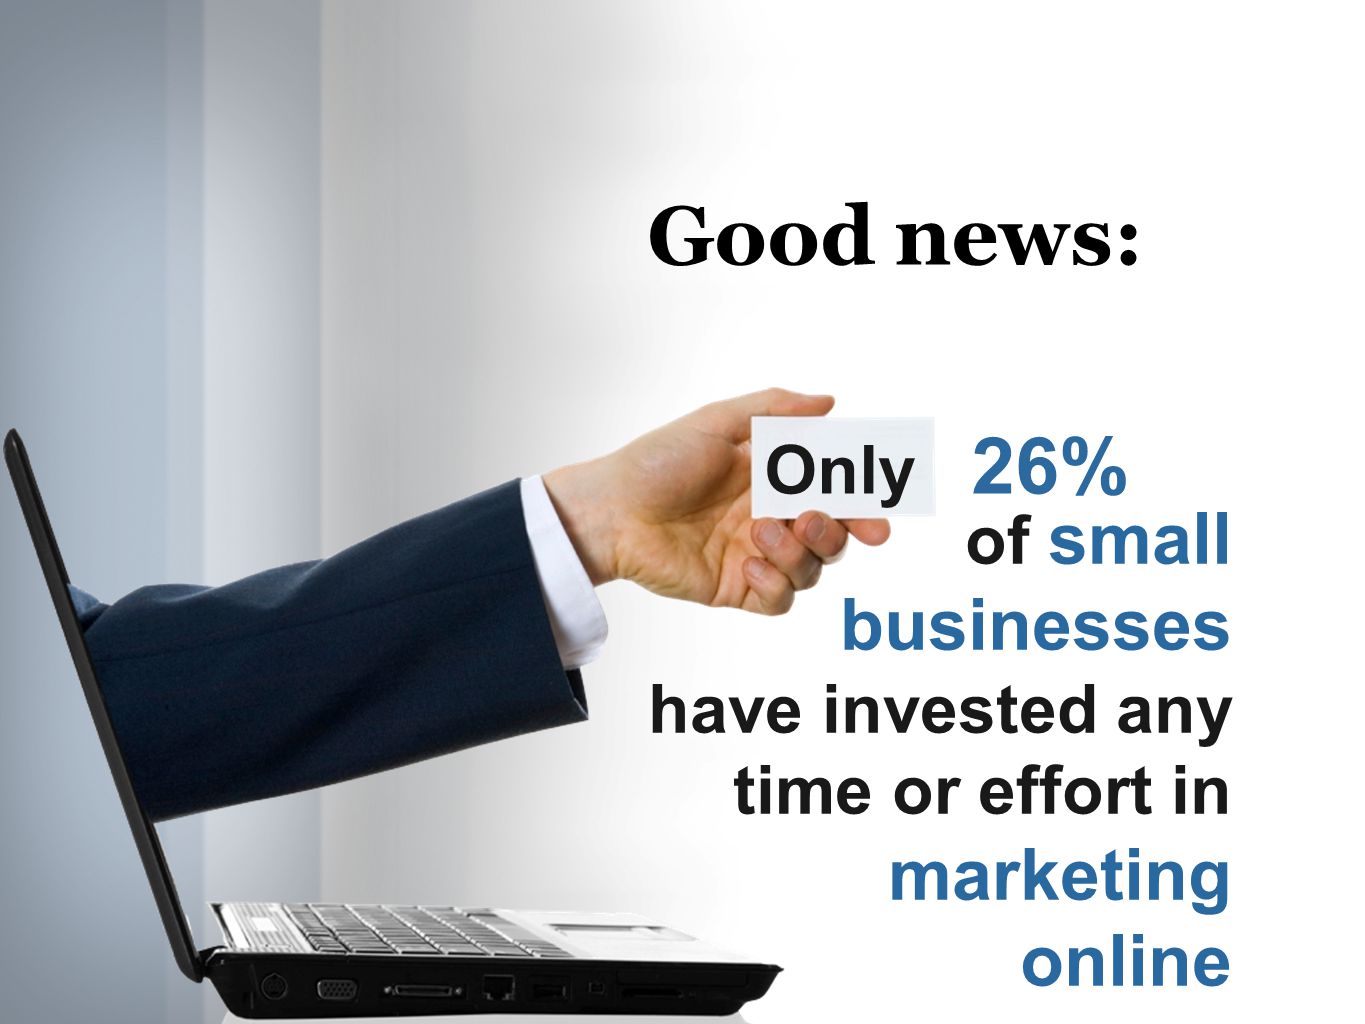 Only 26% Good news: of small businesses have invested any time or effort in marketing online